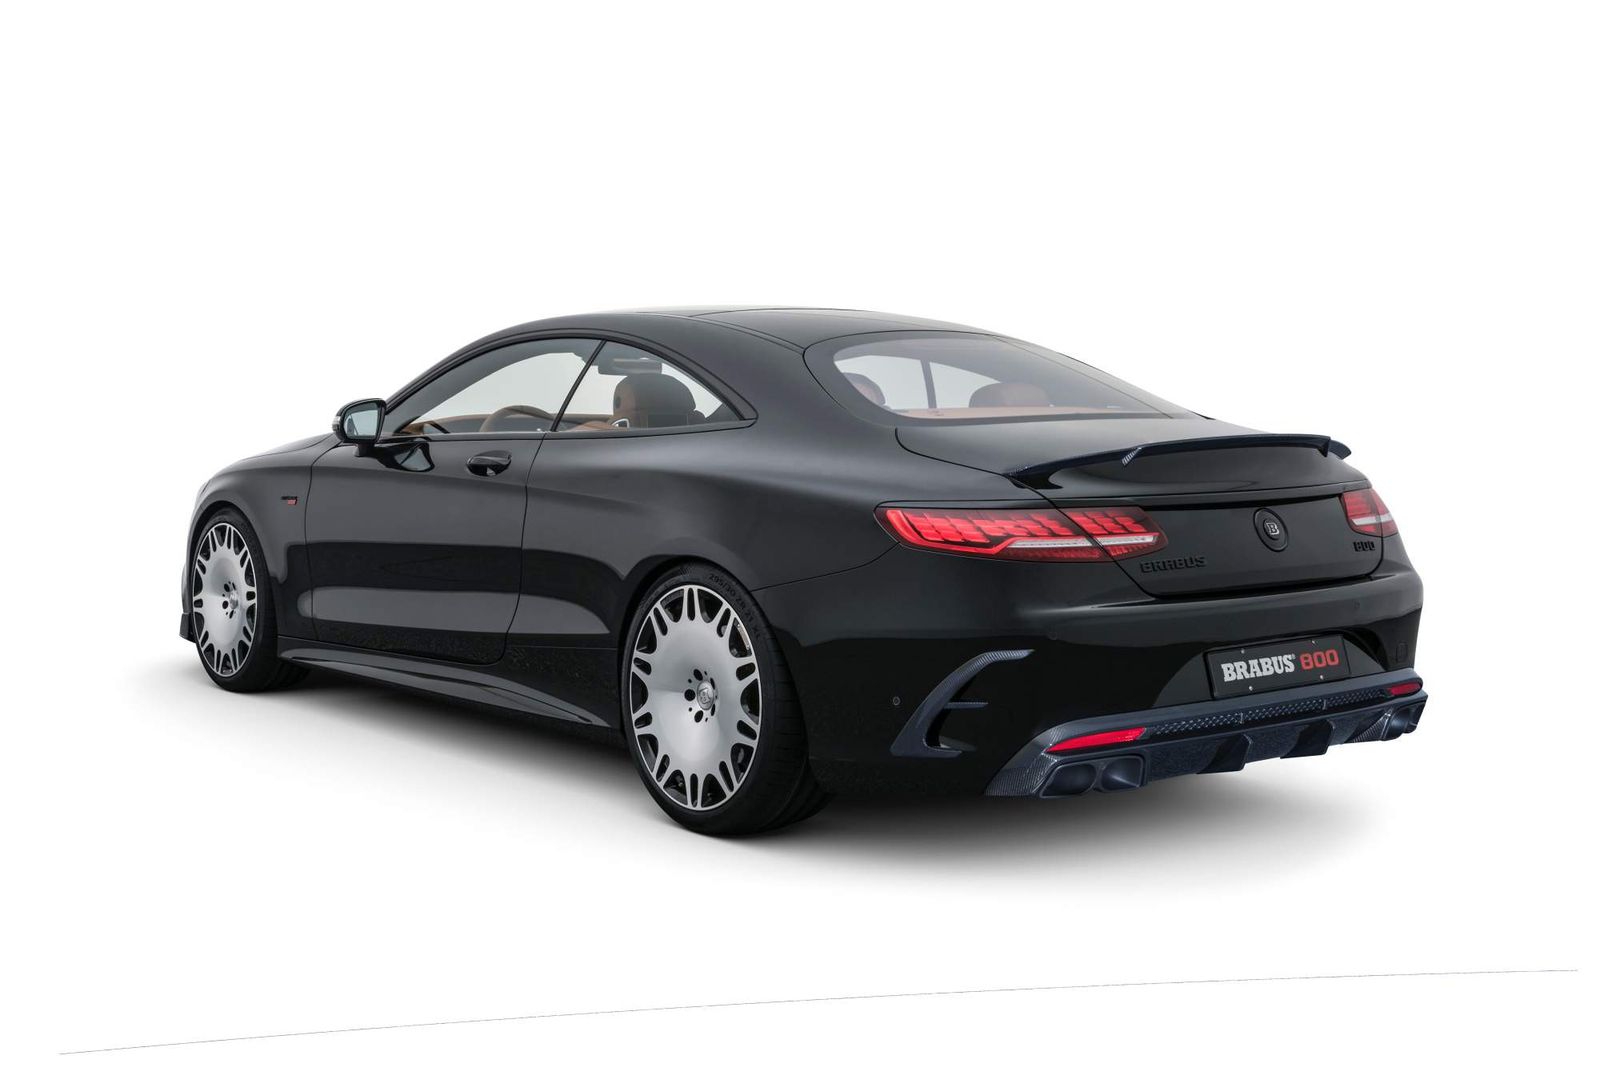 Brabus-800-based-on-Mercedes-AMG-S63-4MATIC+-Coupe-2